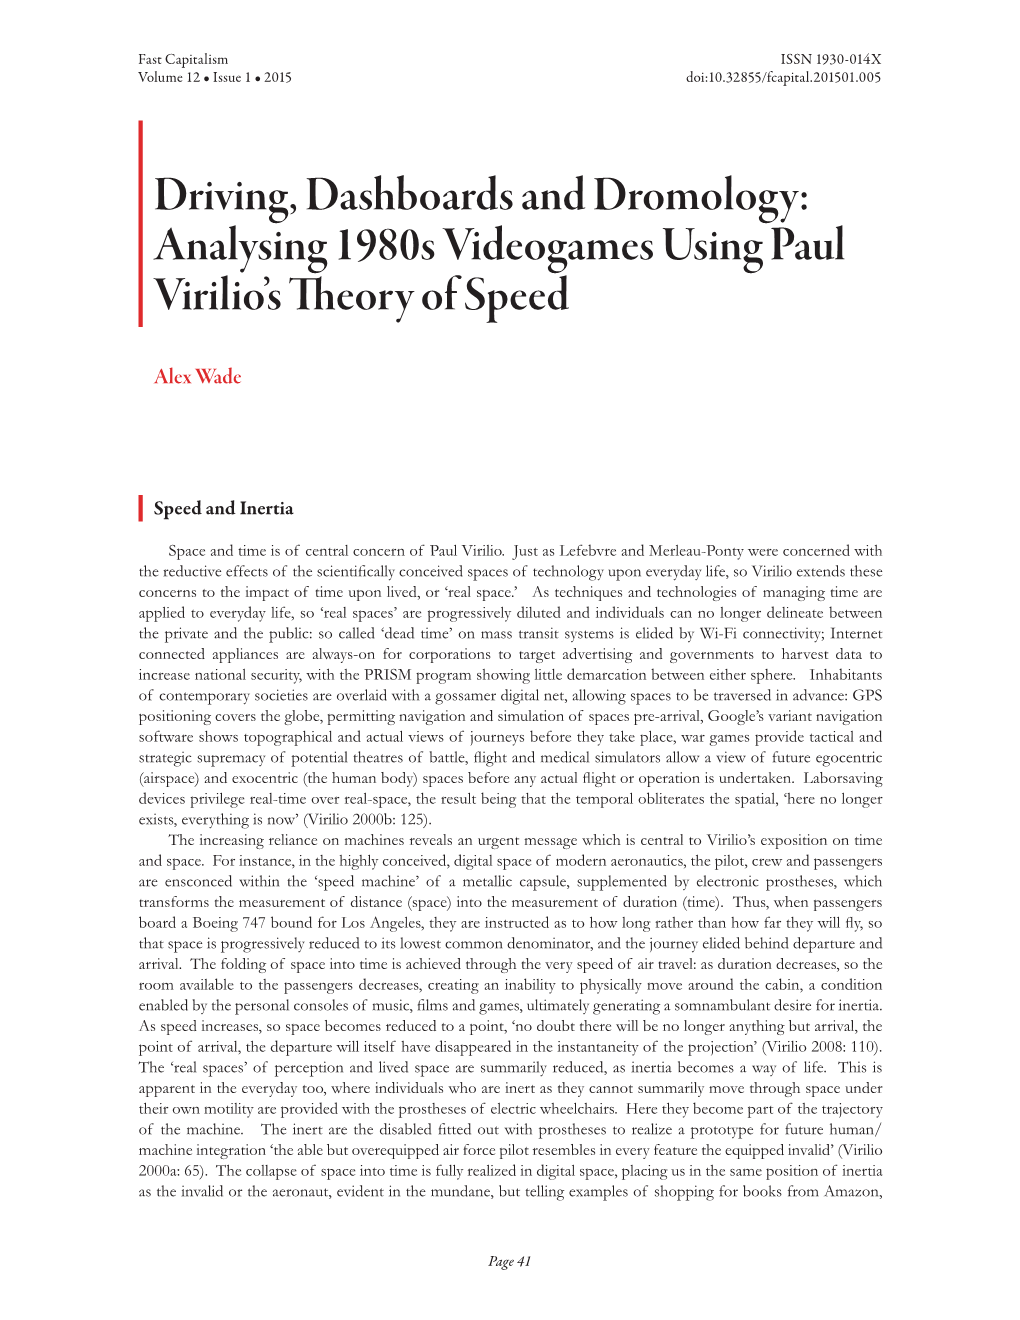 Driving, Dashboards and Dromology: Analysing 1980S Videogames Using Paul Virilio’S Theory of Speed